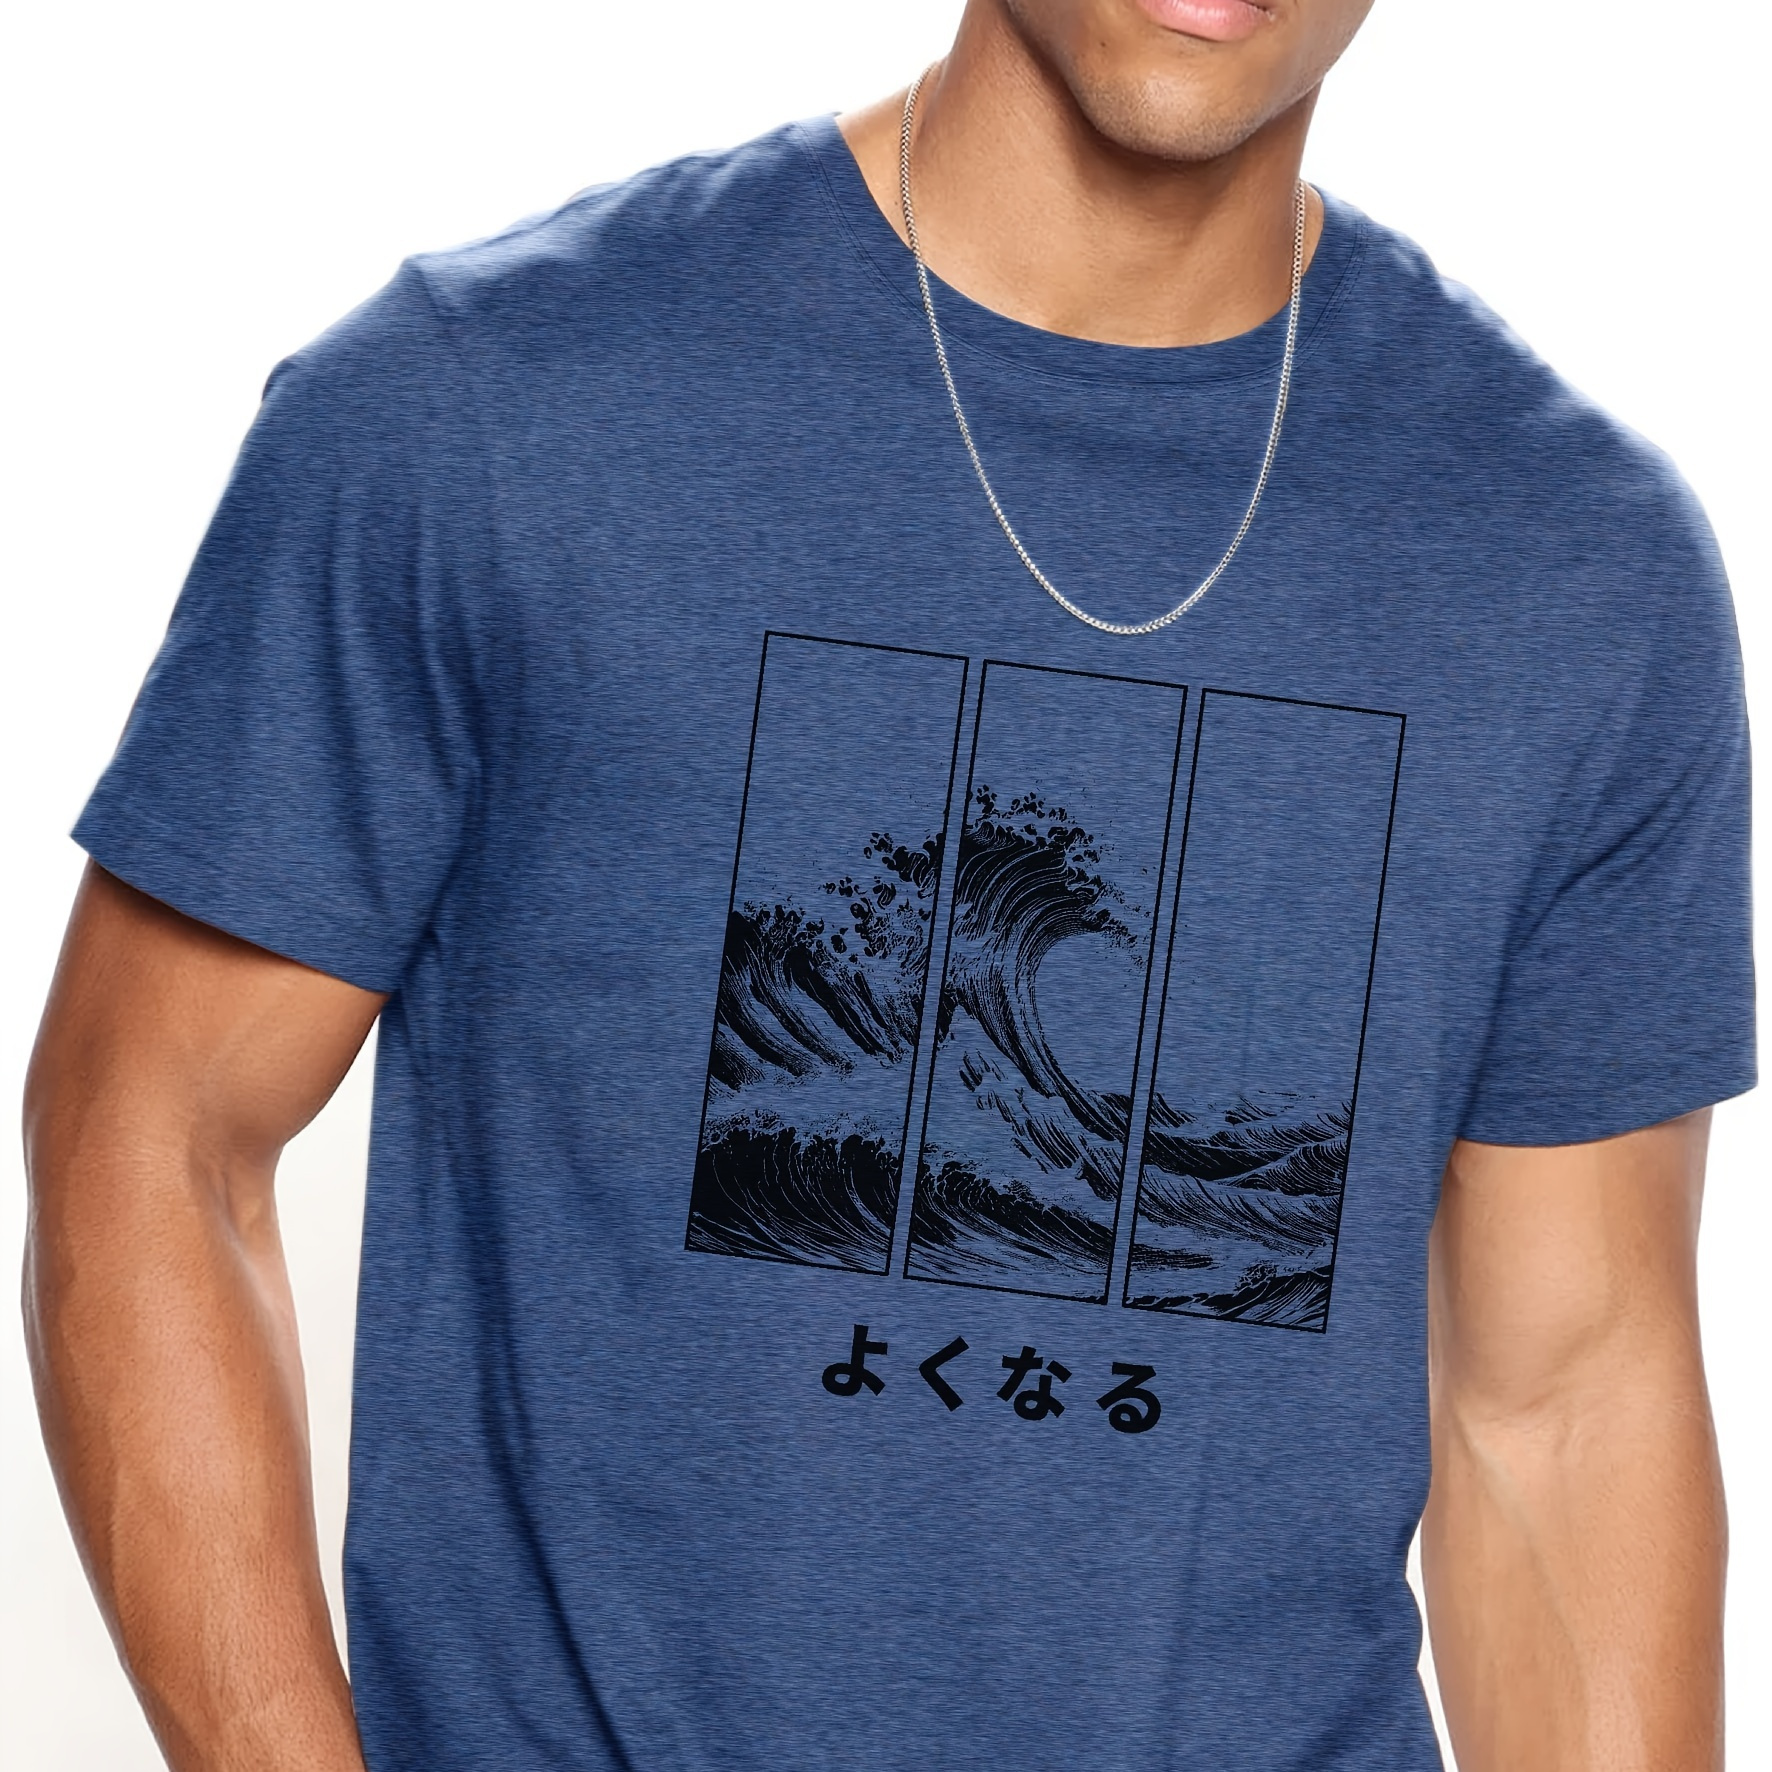 

Waves Round Neck Graphic T-shirts, Causal Tees, Short Sleeves Comfortable Tops, Men's Summer Clothing